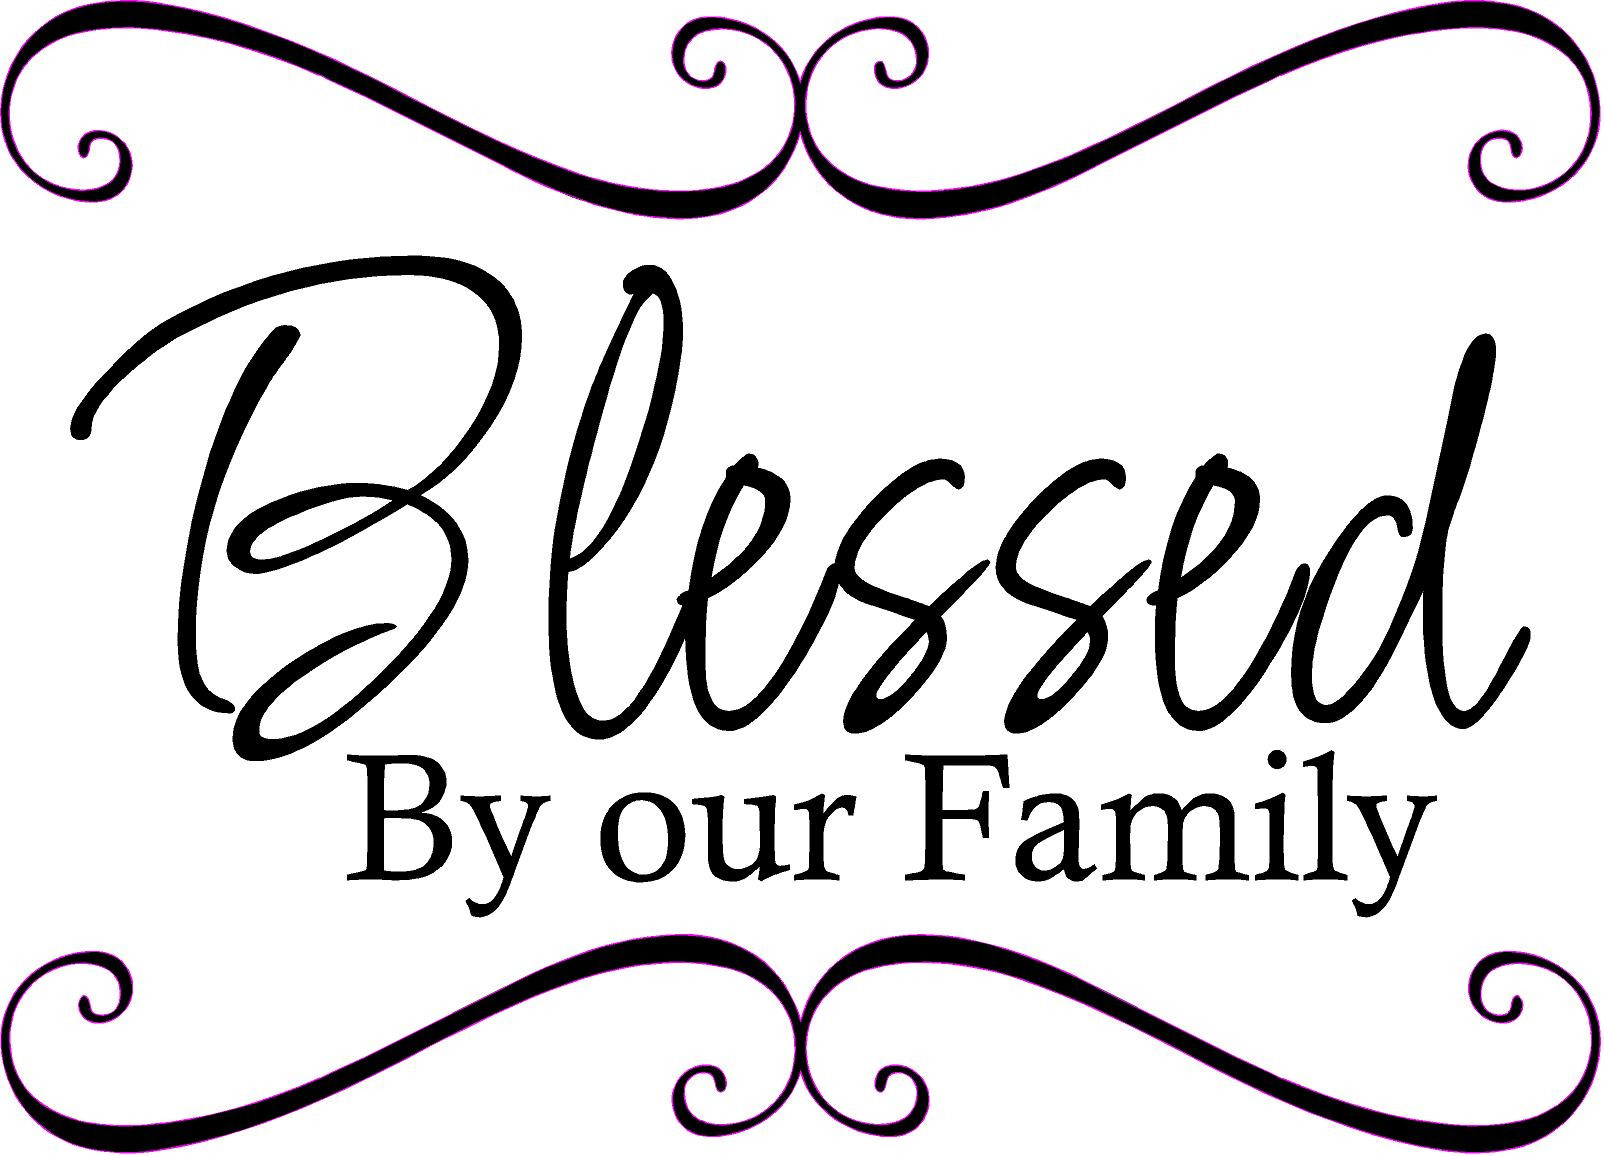 Bless Family Quotes
 Blessed By Our Family Quote the Walls